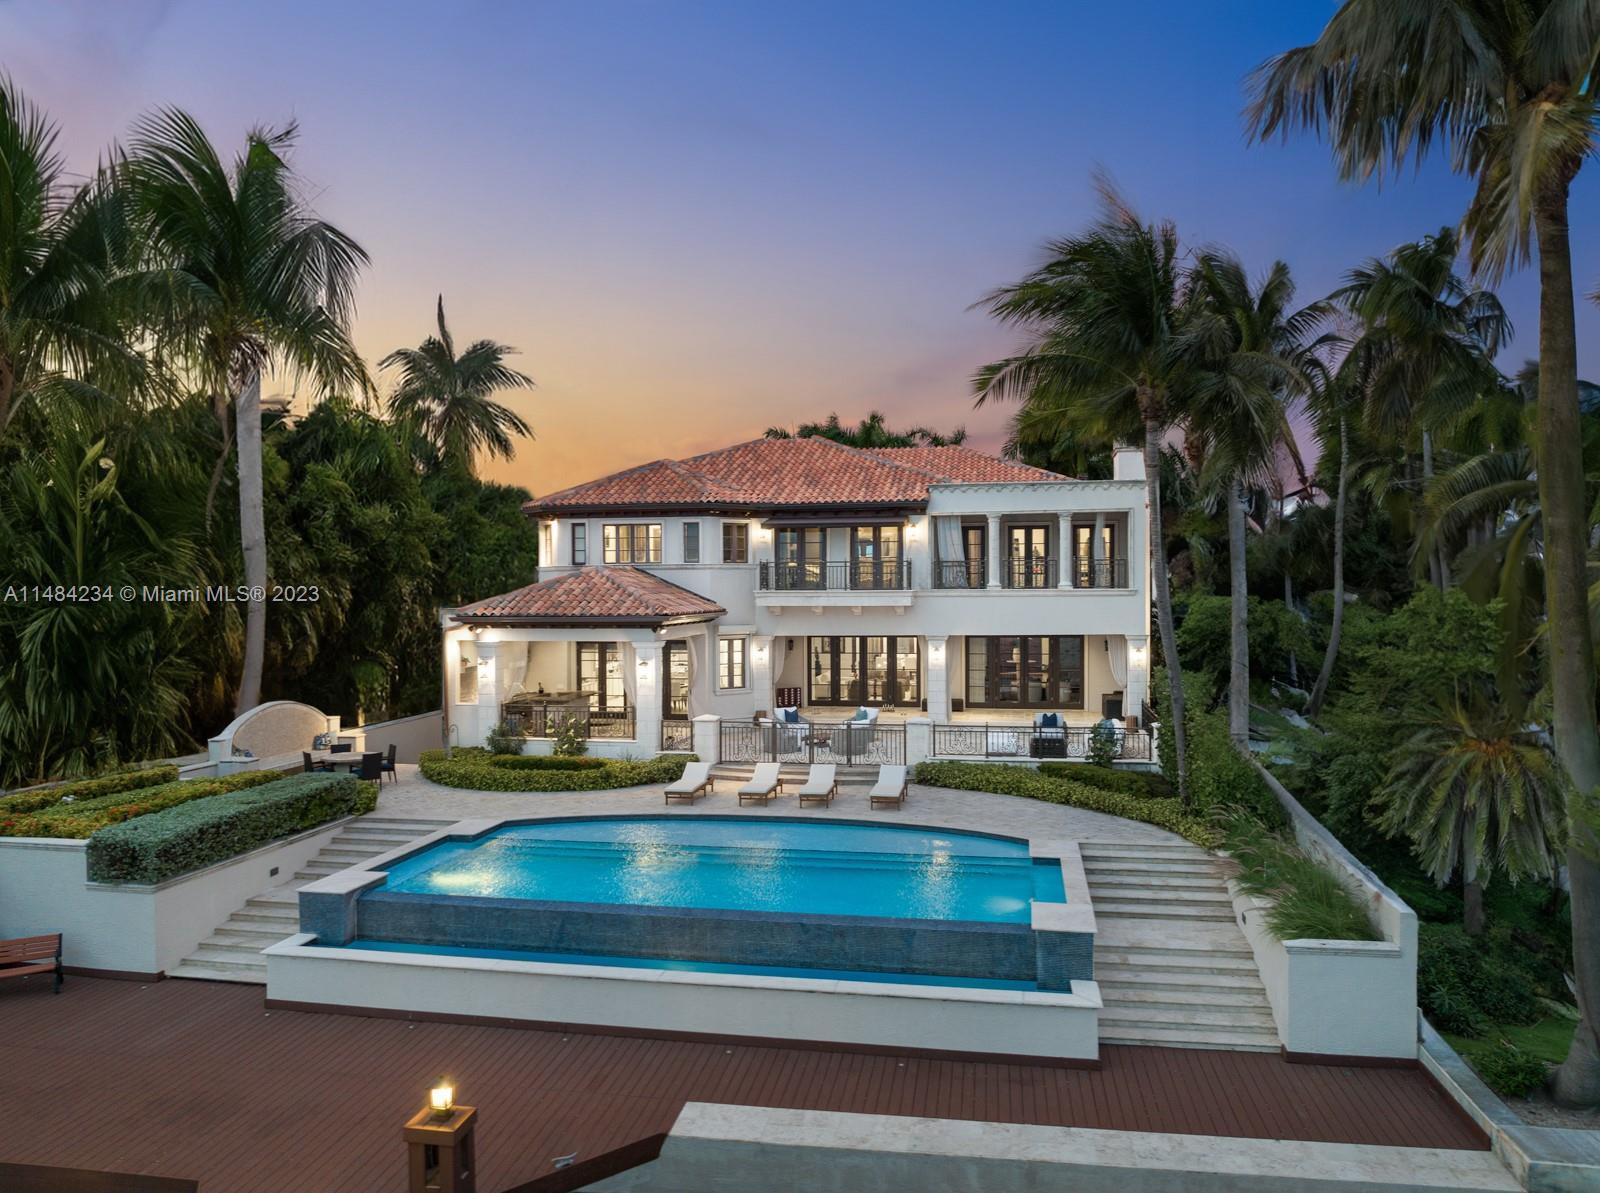 A fairytale story! This timeless Mediterranean Waterfront Villa in the heart of Coconut Grove boasts soaring ceilings, and light-filled open living spaces with custom millwork, all overlooking the most mesmerizing unobstructed and elevated views of Biscayne Bay. The ground level has a seamless blend of indoor and outdoor spaces, a chef's kitchen, the most idyllic waterfront terrace with a covered BBQ area, an infinity pool, and a private dock. The primary stuns with an impressive attached sitting room/office, a private terrace, and captivating bay views. This villa comes with 4 beds upstairs, a study/library, a detached two-bed guest house, a three-car garage, and a movie theater. Located in a double corner lot, this fully walled gated home on a patrolled street is a truly private oasis.